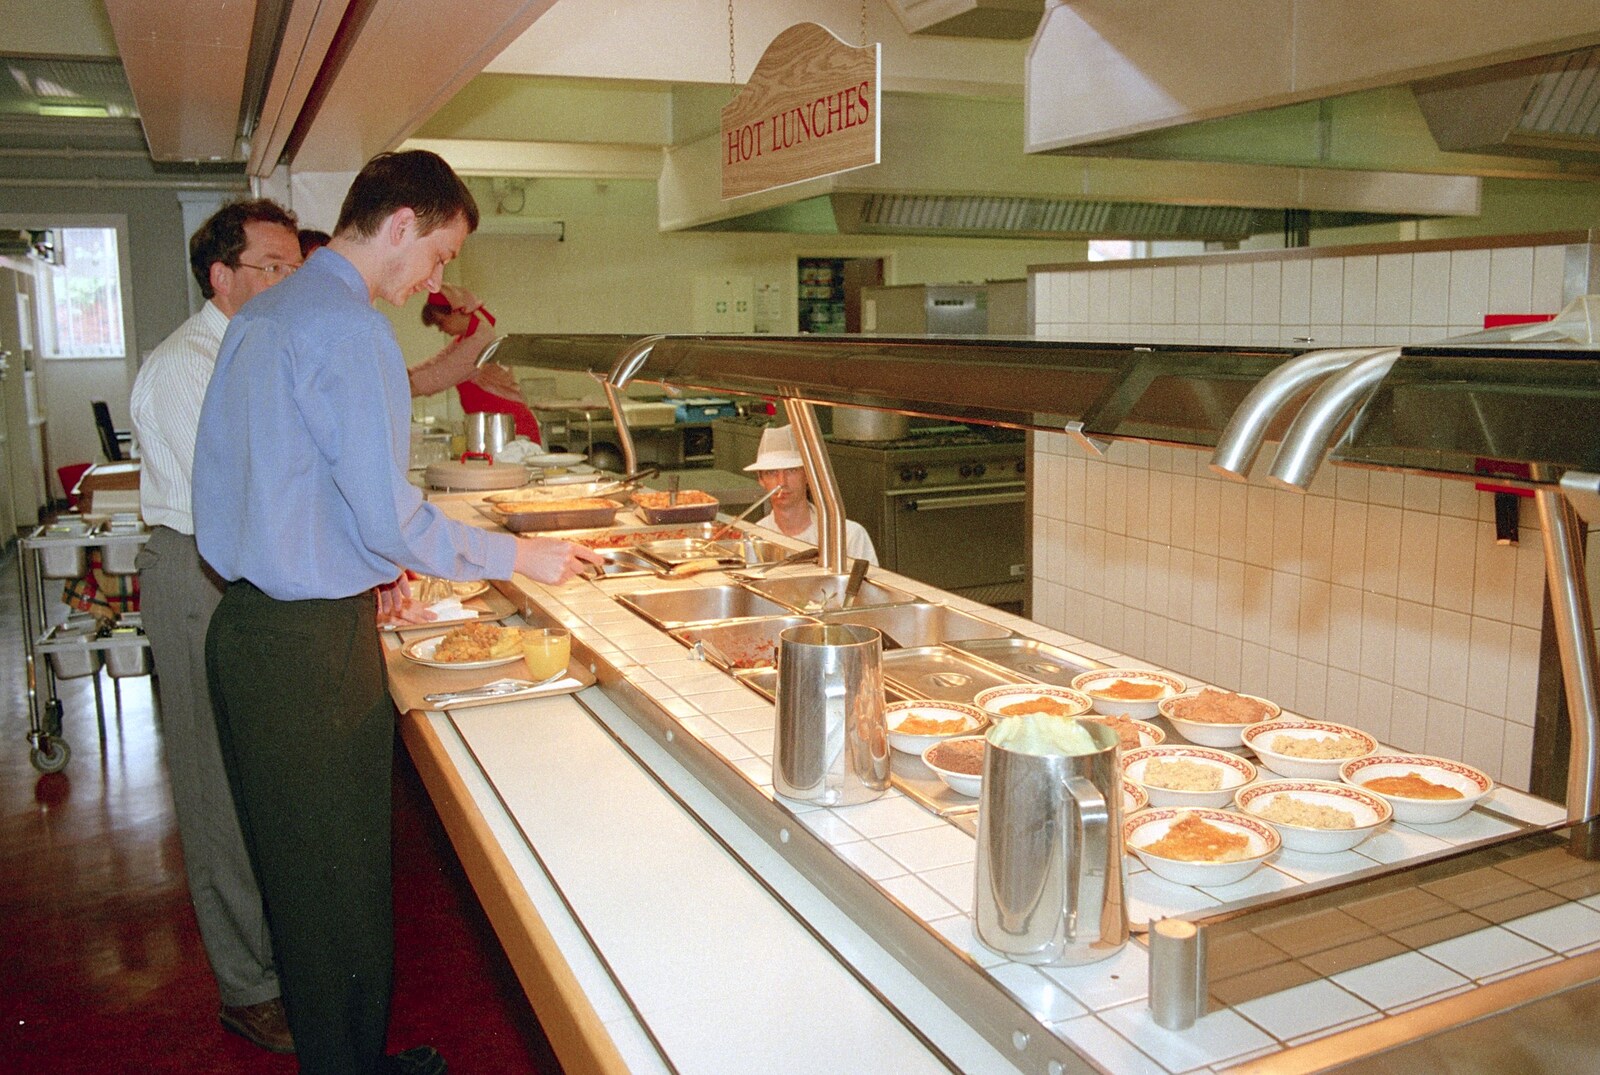 A Last Few Days at CISU, Suffolk County Council, Ipswich - 11th June 2000: Andrew gets some food in